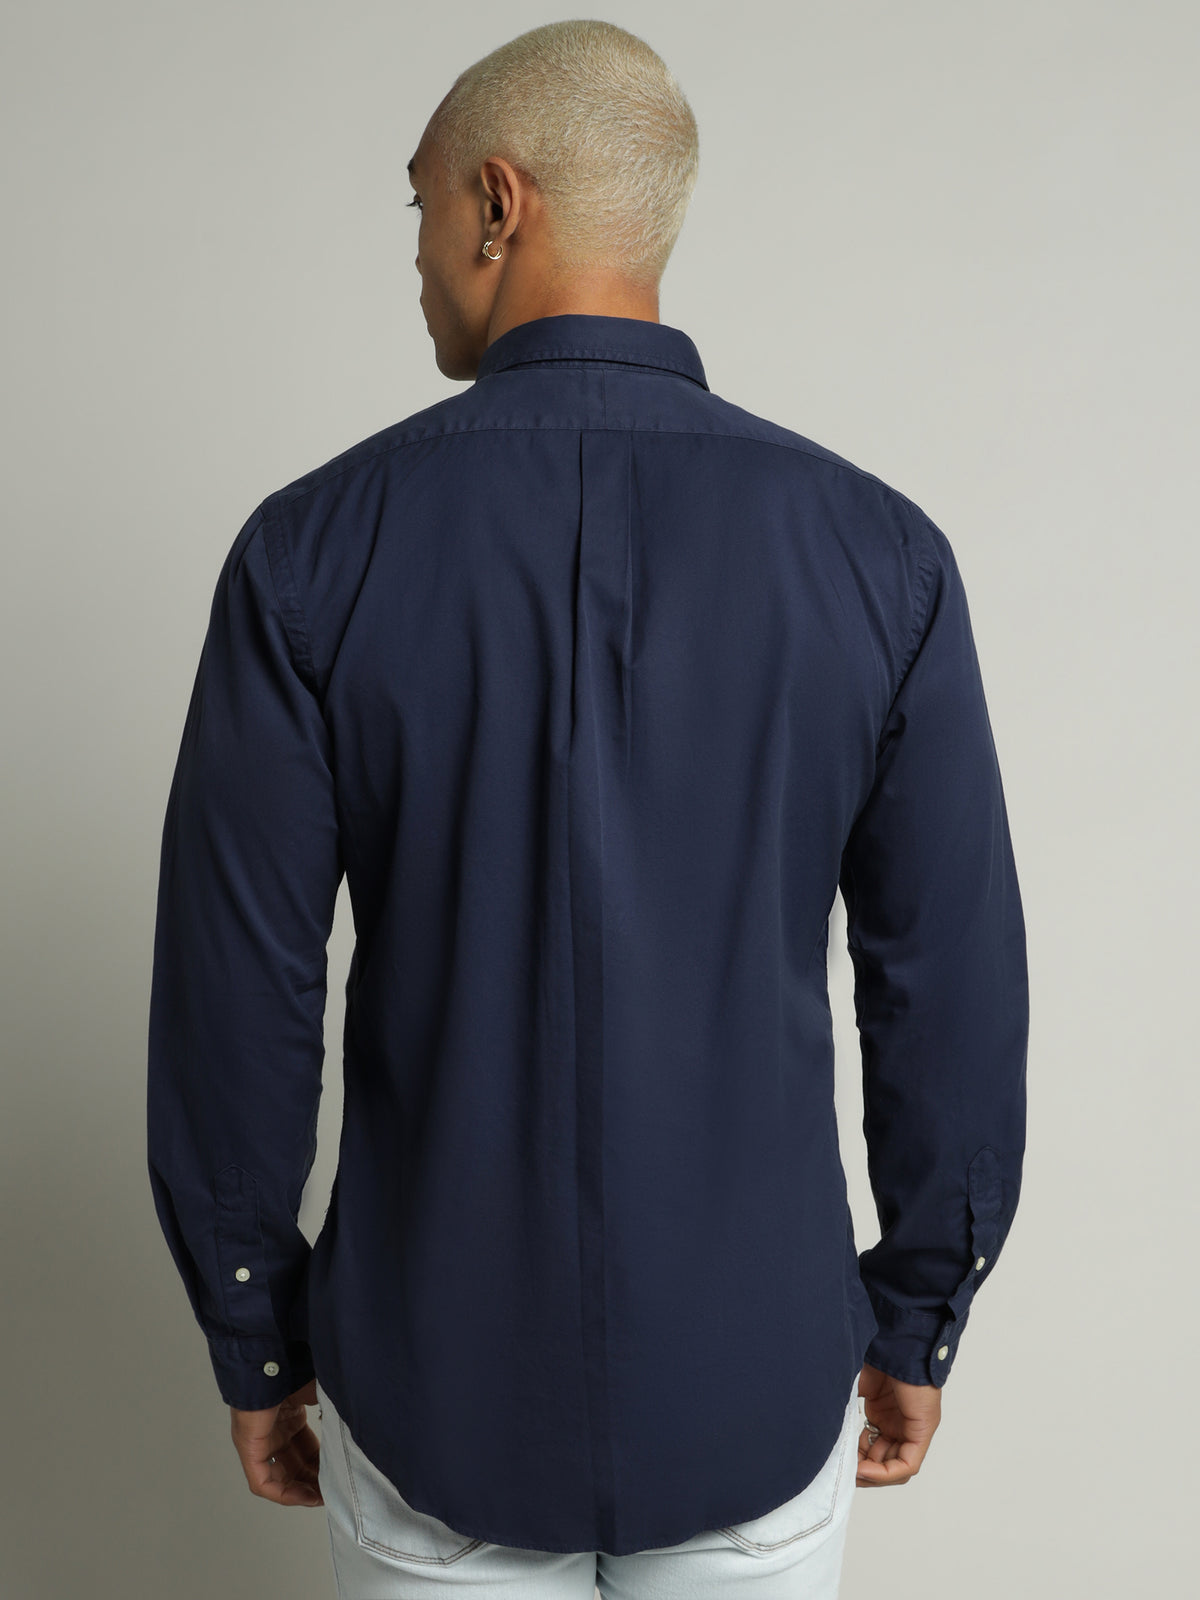 Slim Fit Twill Long Sleeve Shirt in Cruise Navy